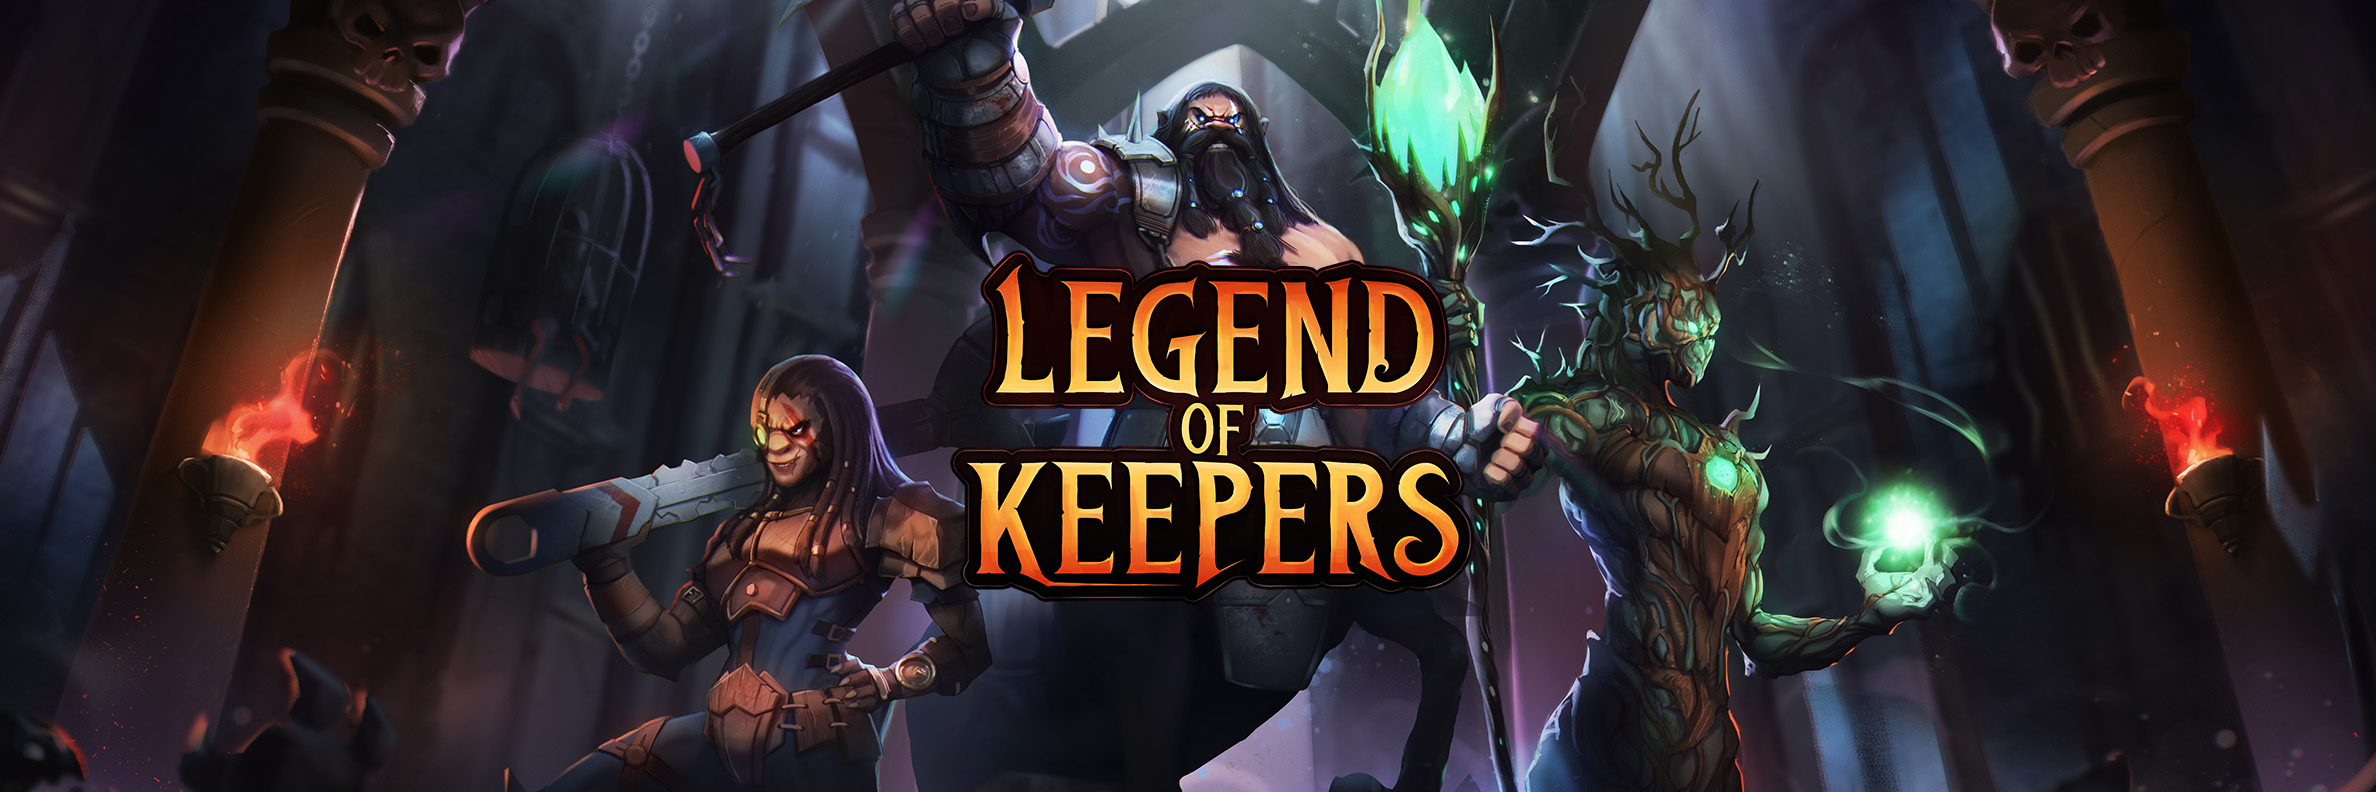 Legend of Keepers: Career of a Dungeon Manager Picture